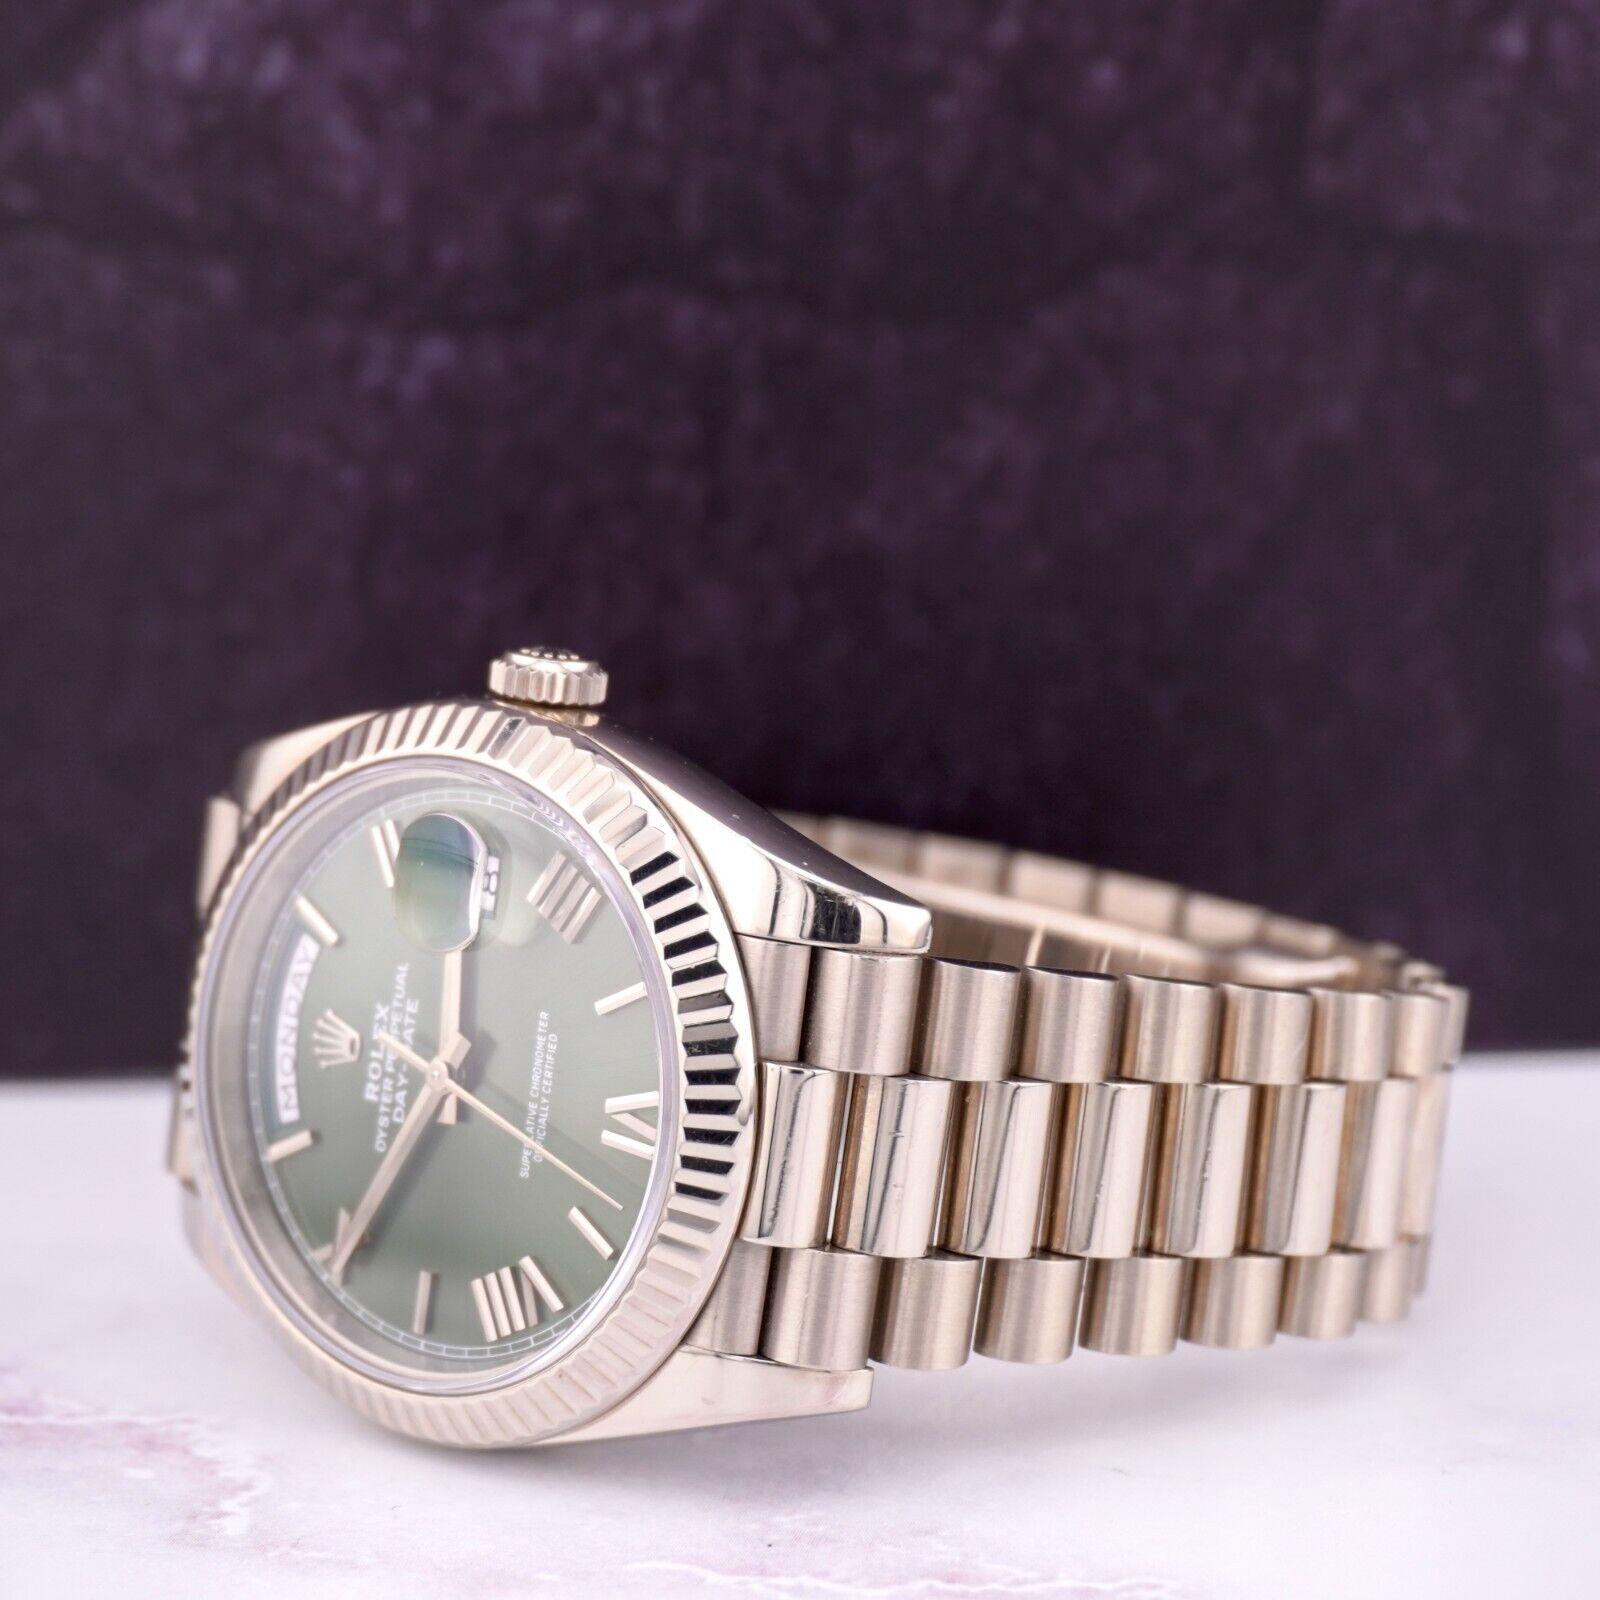 Rolex Day-Date 40 President 18k White Gold Men's Watch Olive Green DIAL 228239 For Sale 1